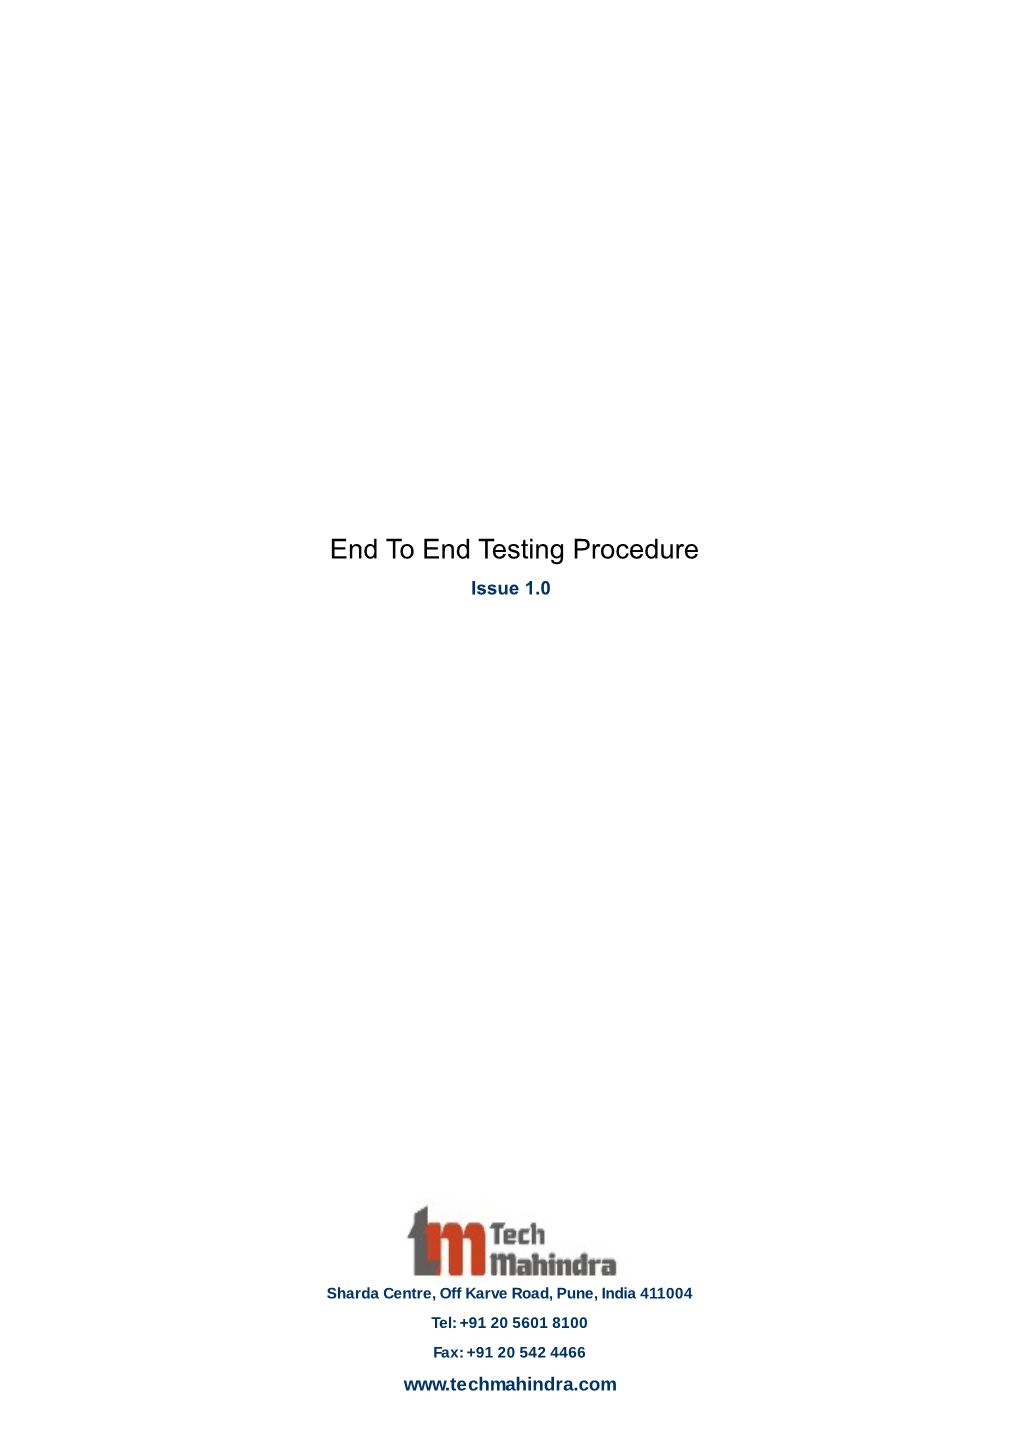 End to End Testing Procedure